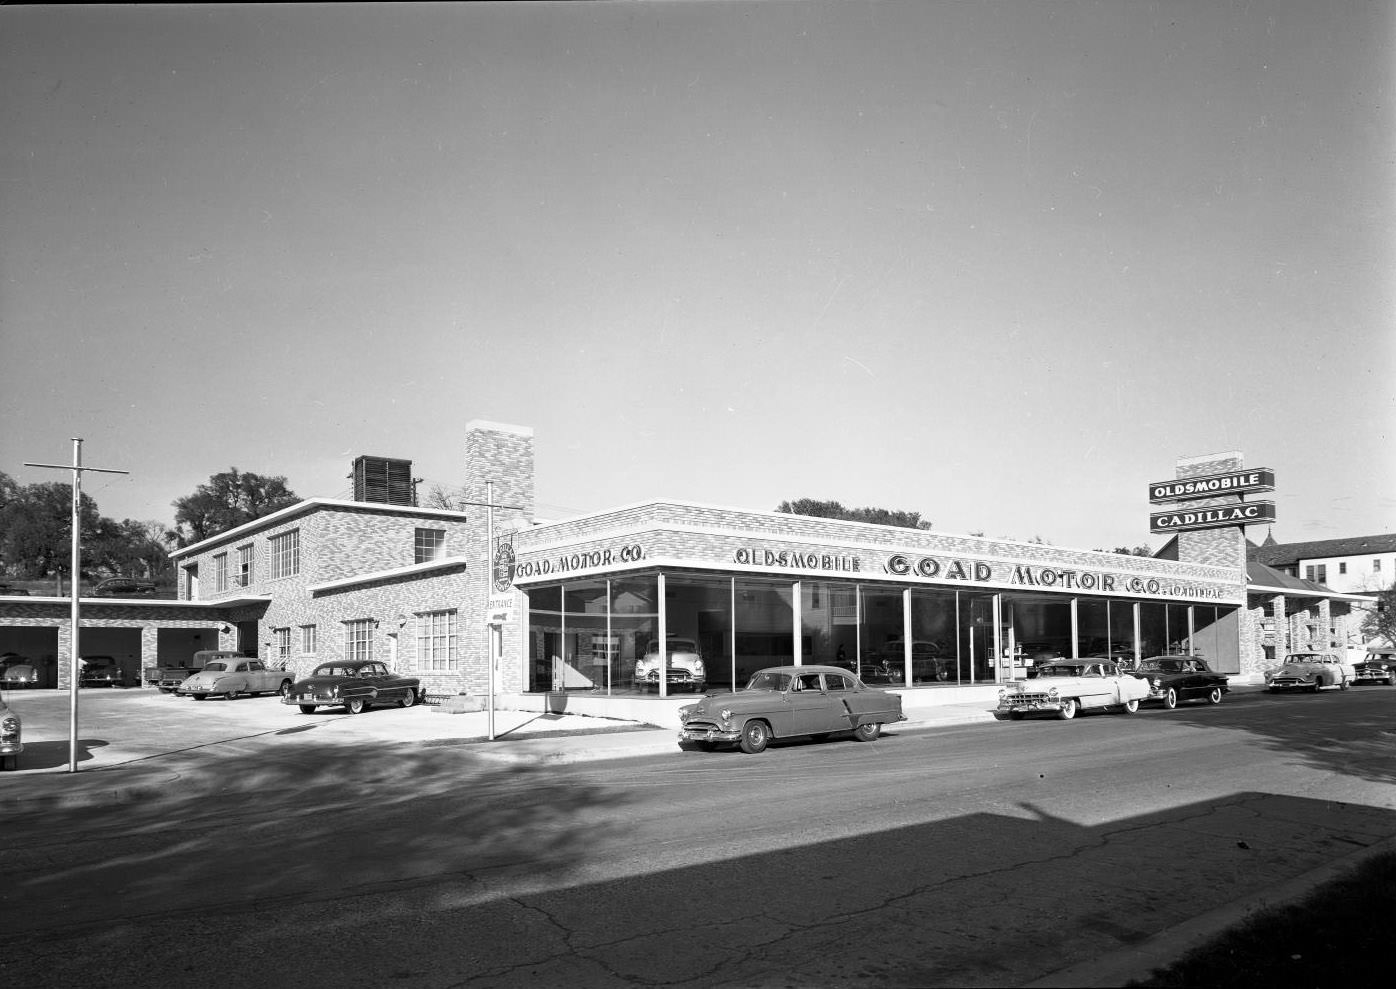 Goad Motor Company Building and Lot, 1951